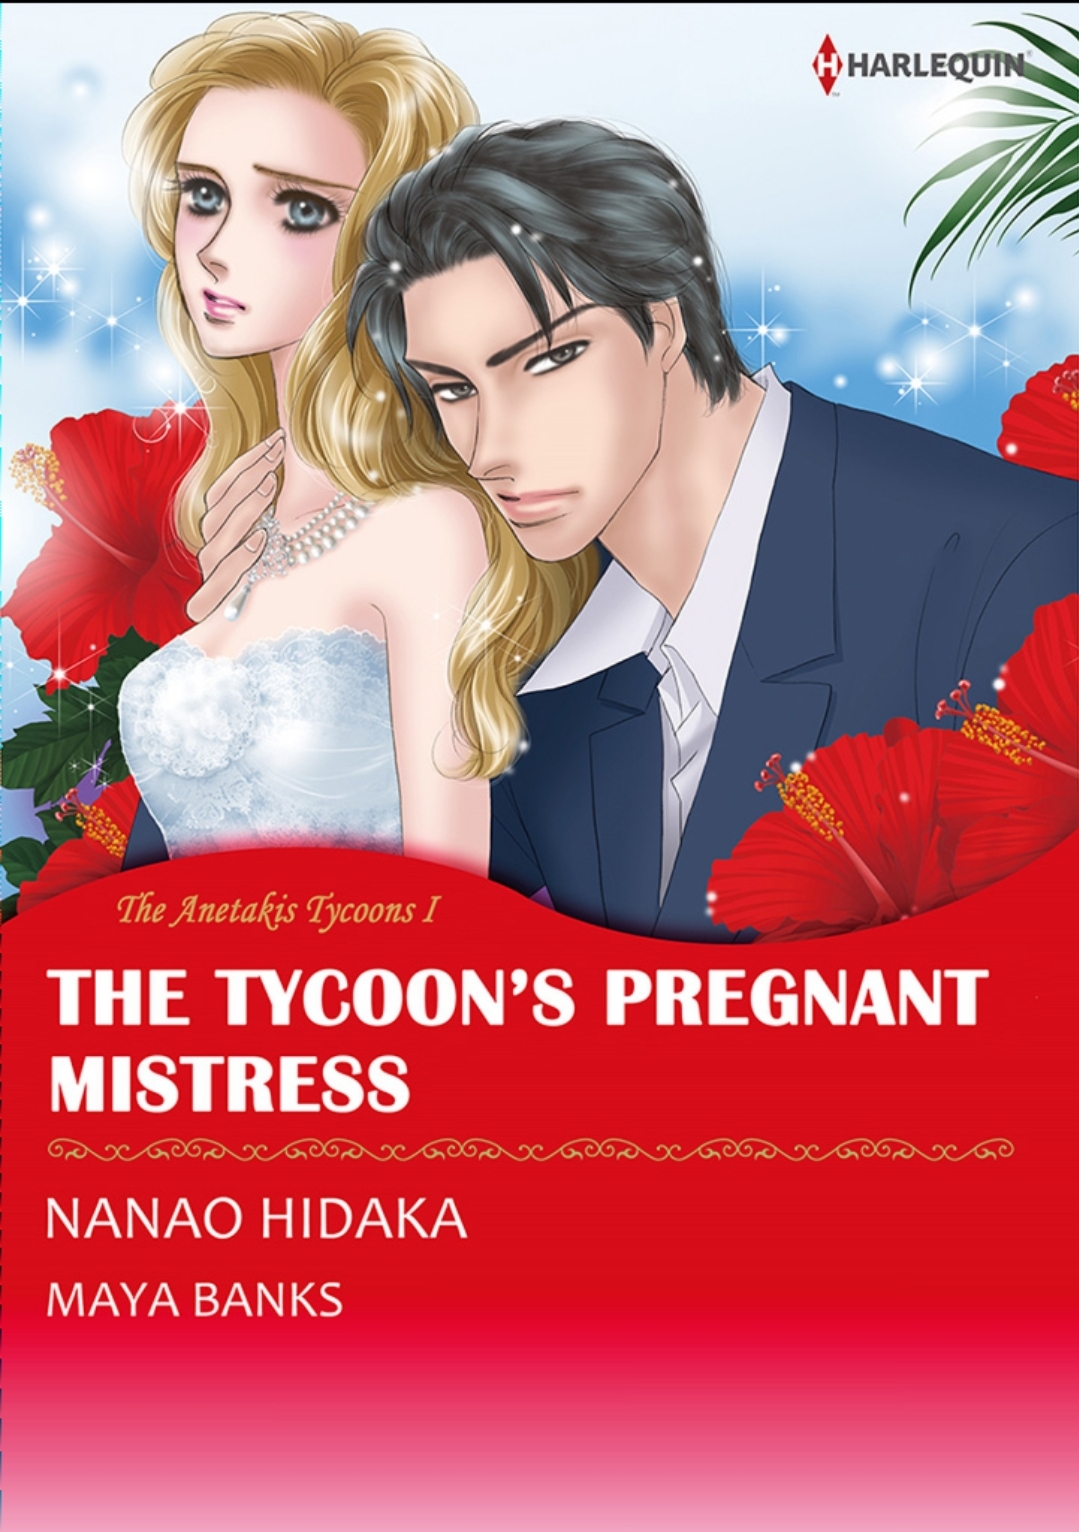 The Tycoon's Pregnant Mistress (The Anetakis Tycoons Book 1) Ch.1